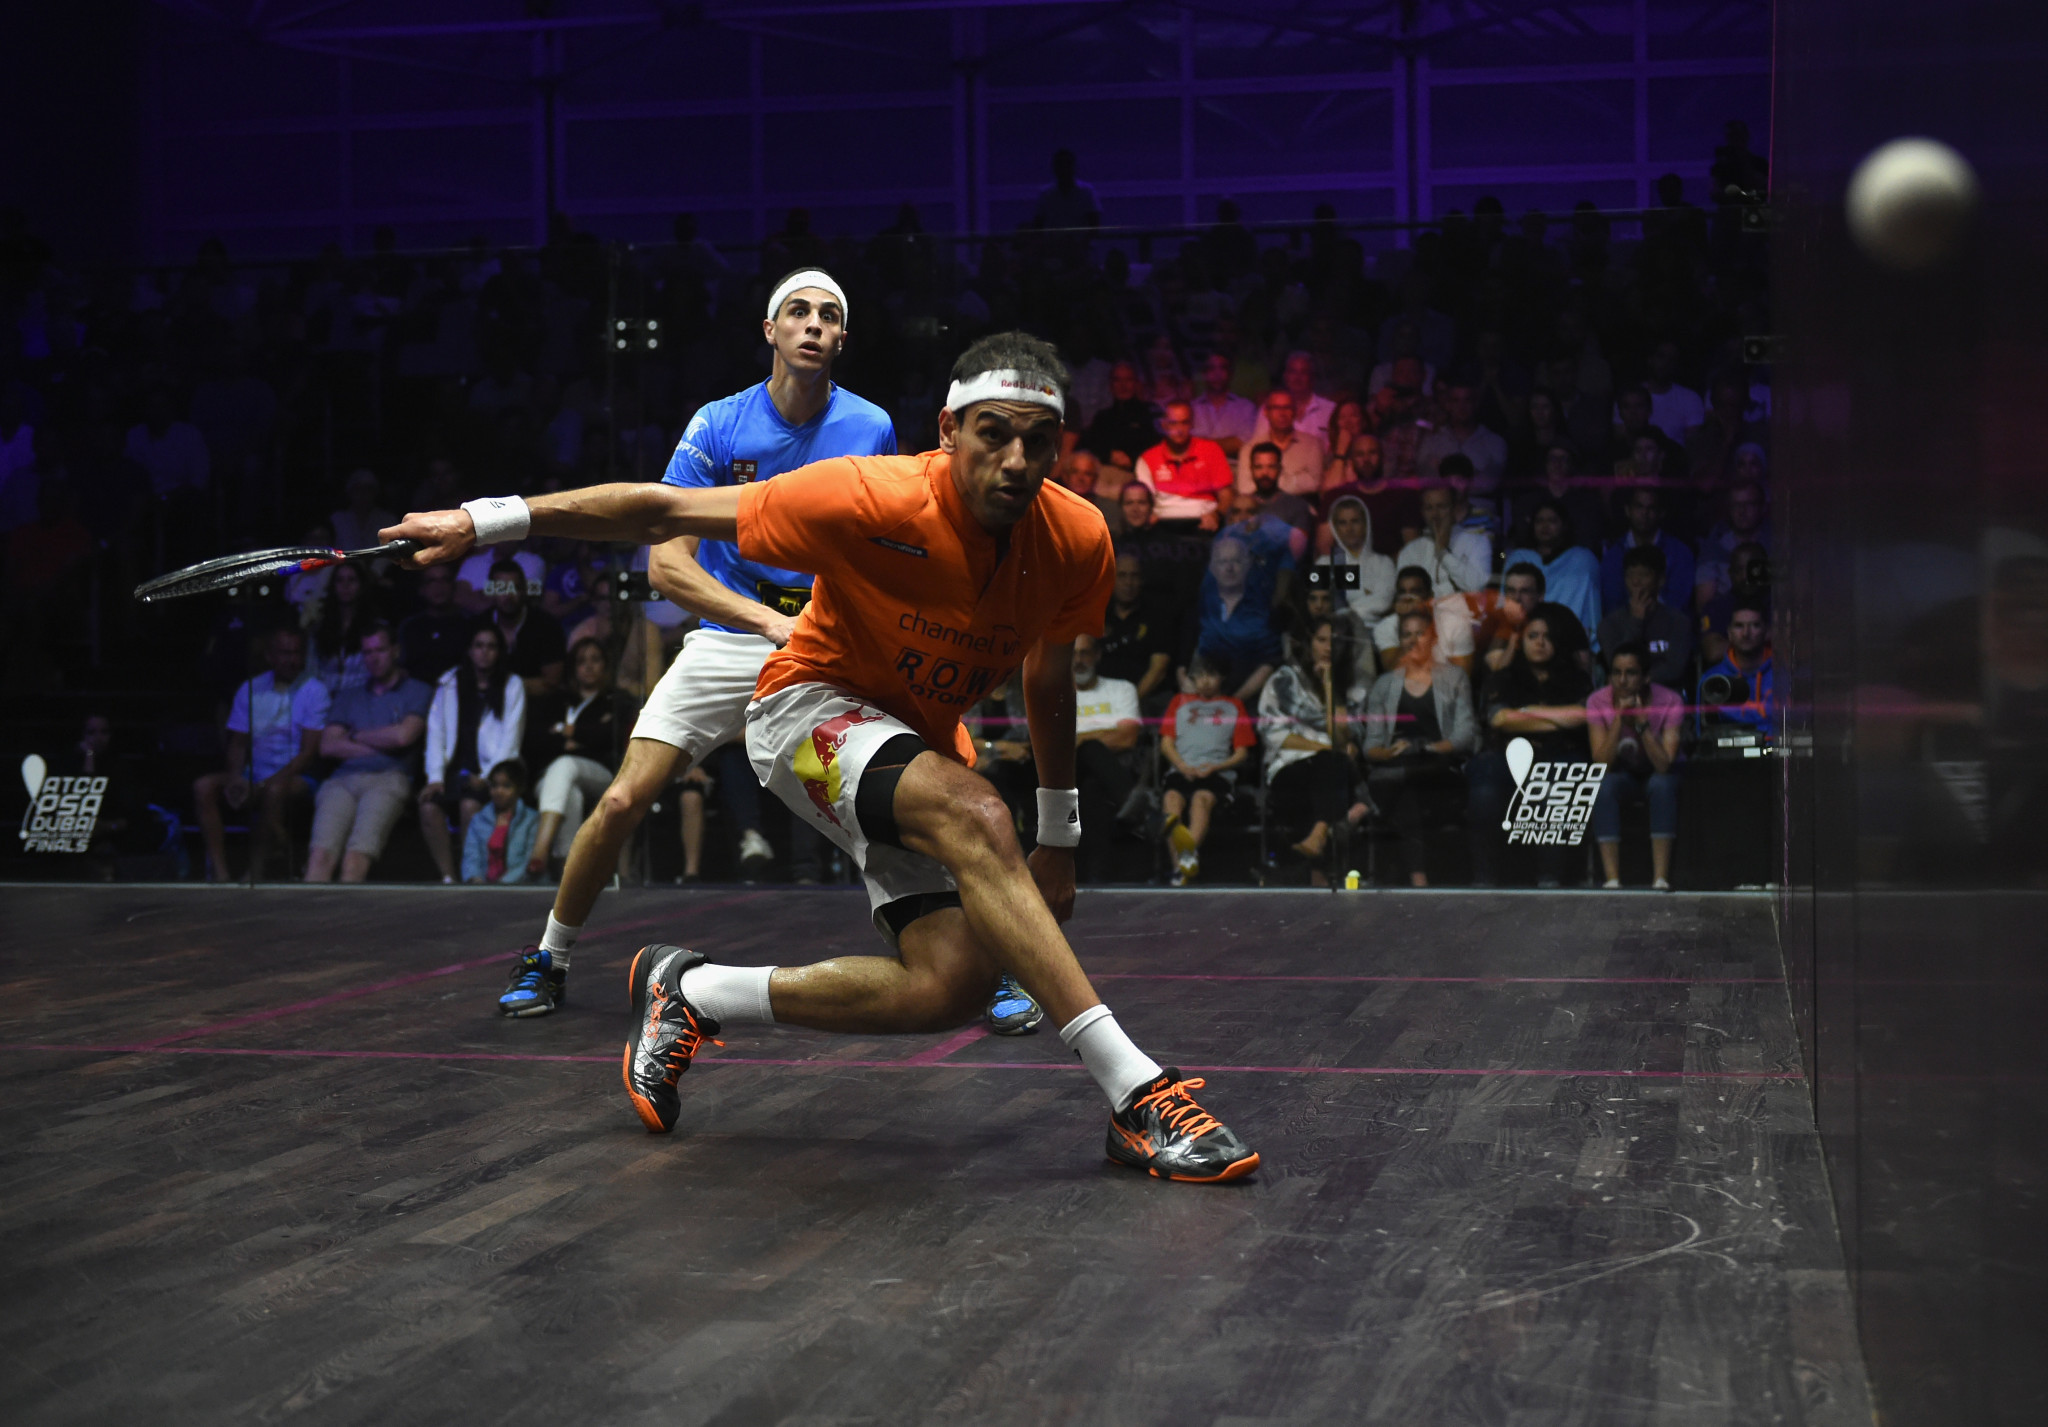 Mohamed ElShorbagy will hope to defend his Manchester Open title when it takes place in June ©Getty Images